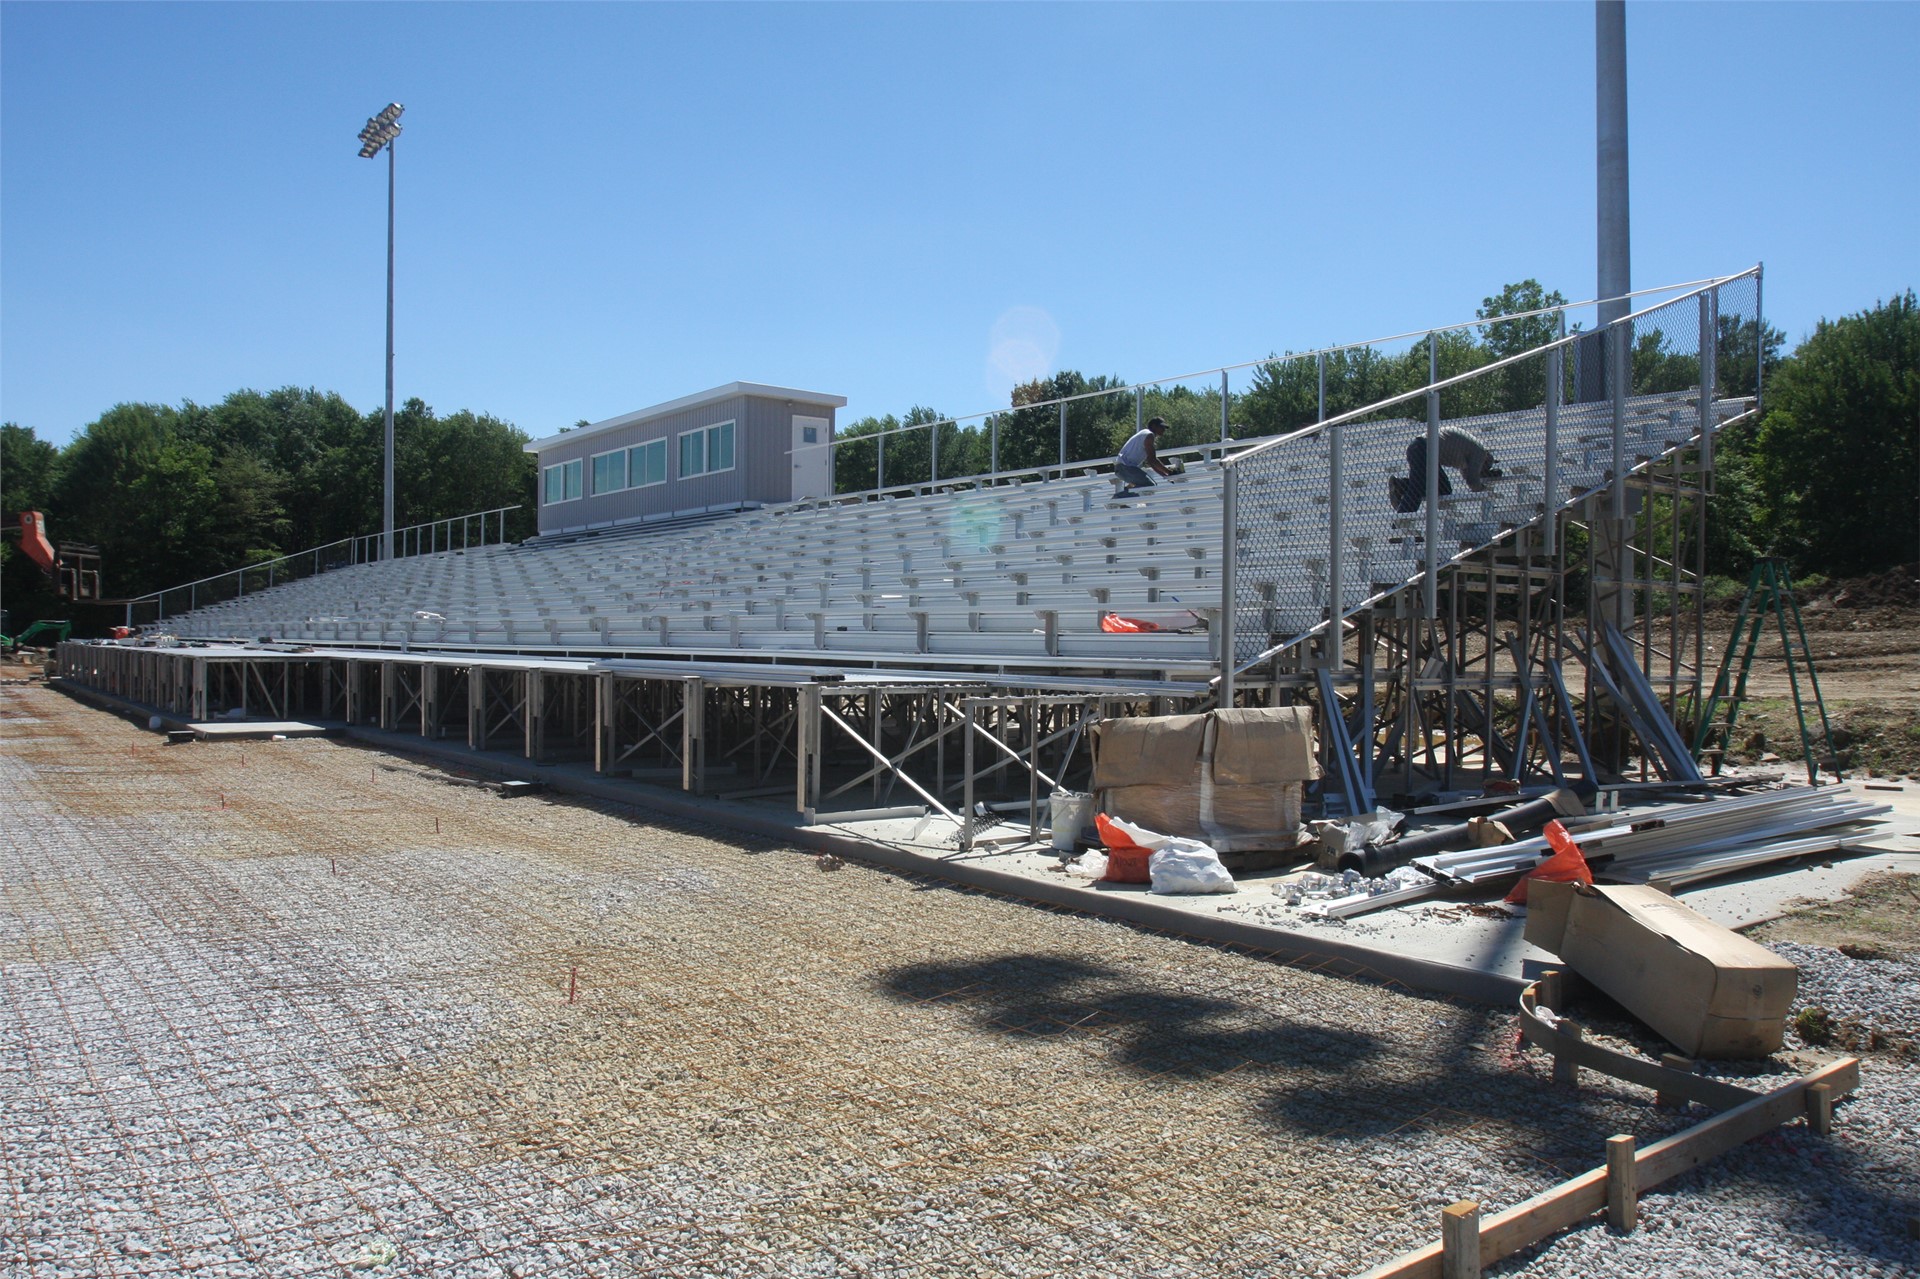 Home stands are being installed